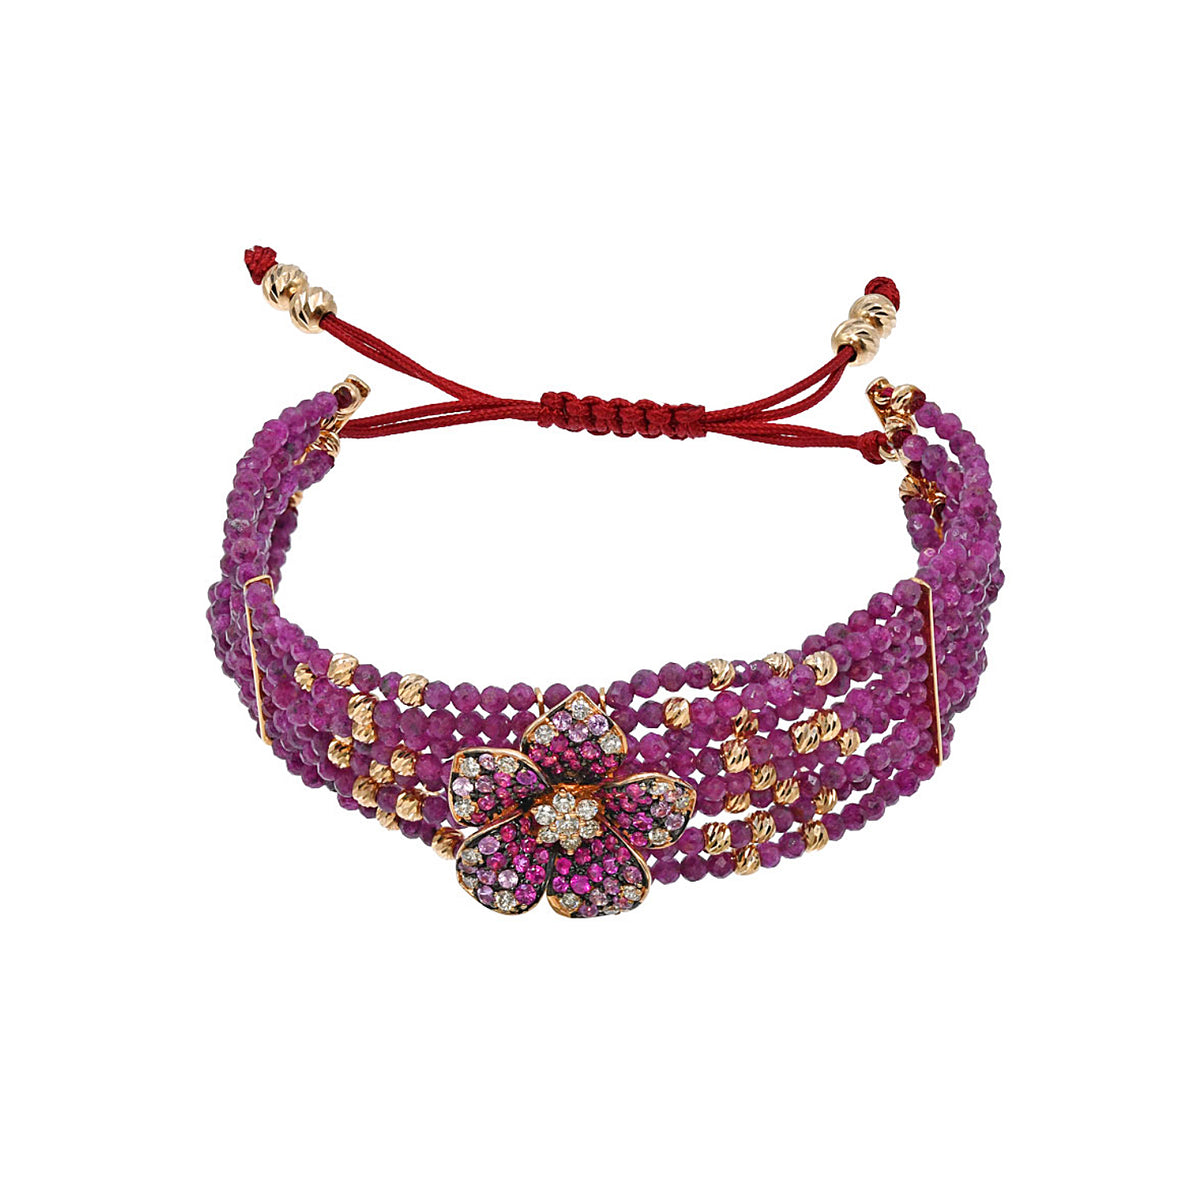 18K Gold bracelet with diamonds and rubies. Thje flower is surrounded by ruby and gold beads. 